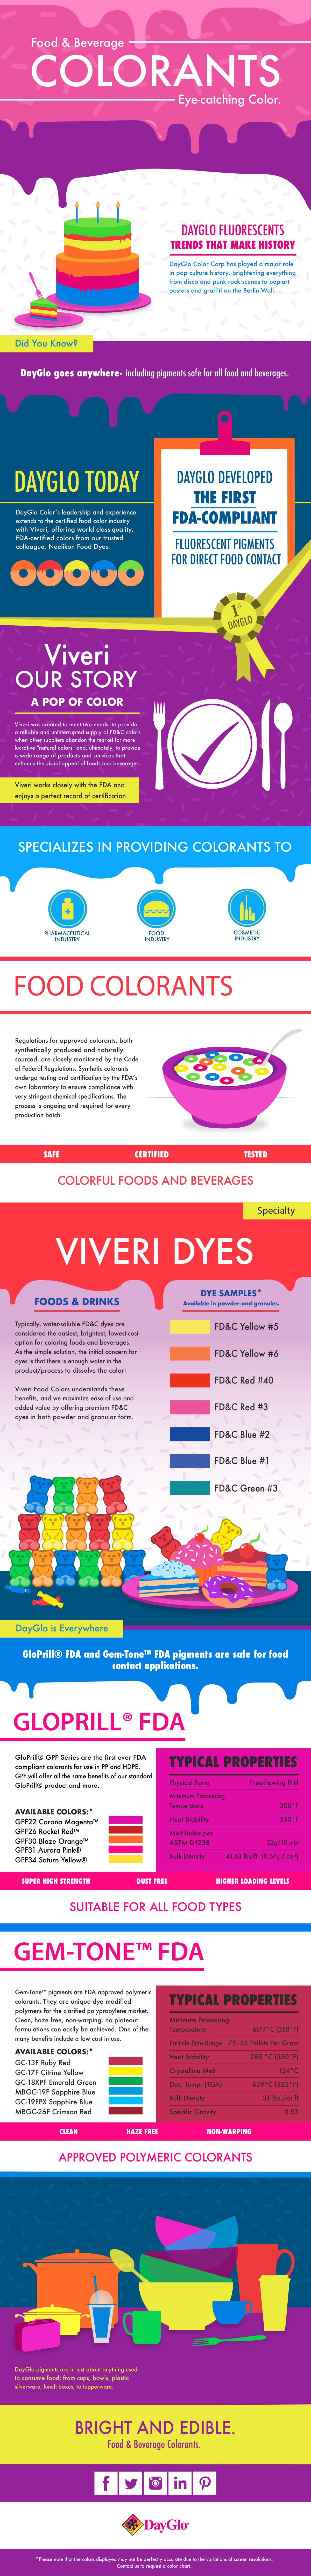 Colorful Food Dye and Colorants Infographic